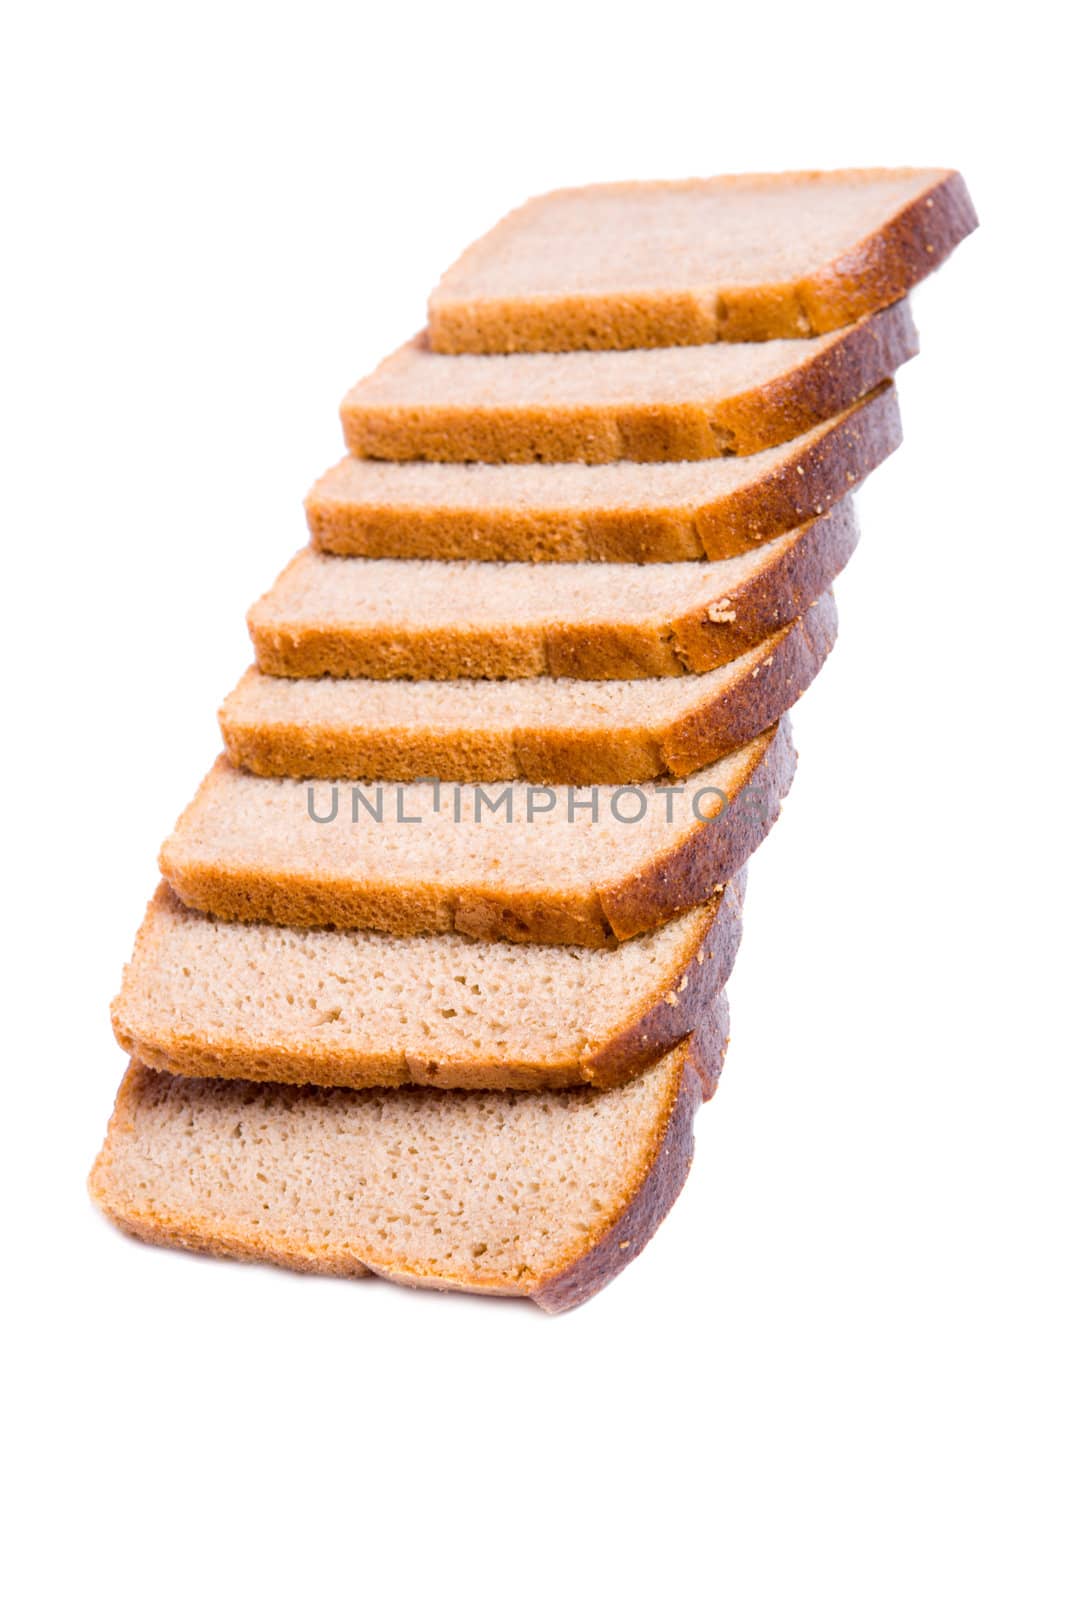  slices of black bread isolated on white